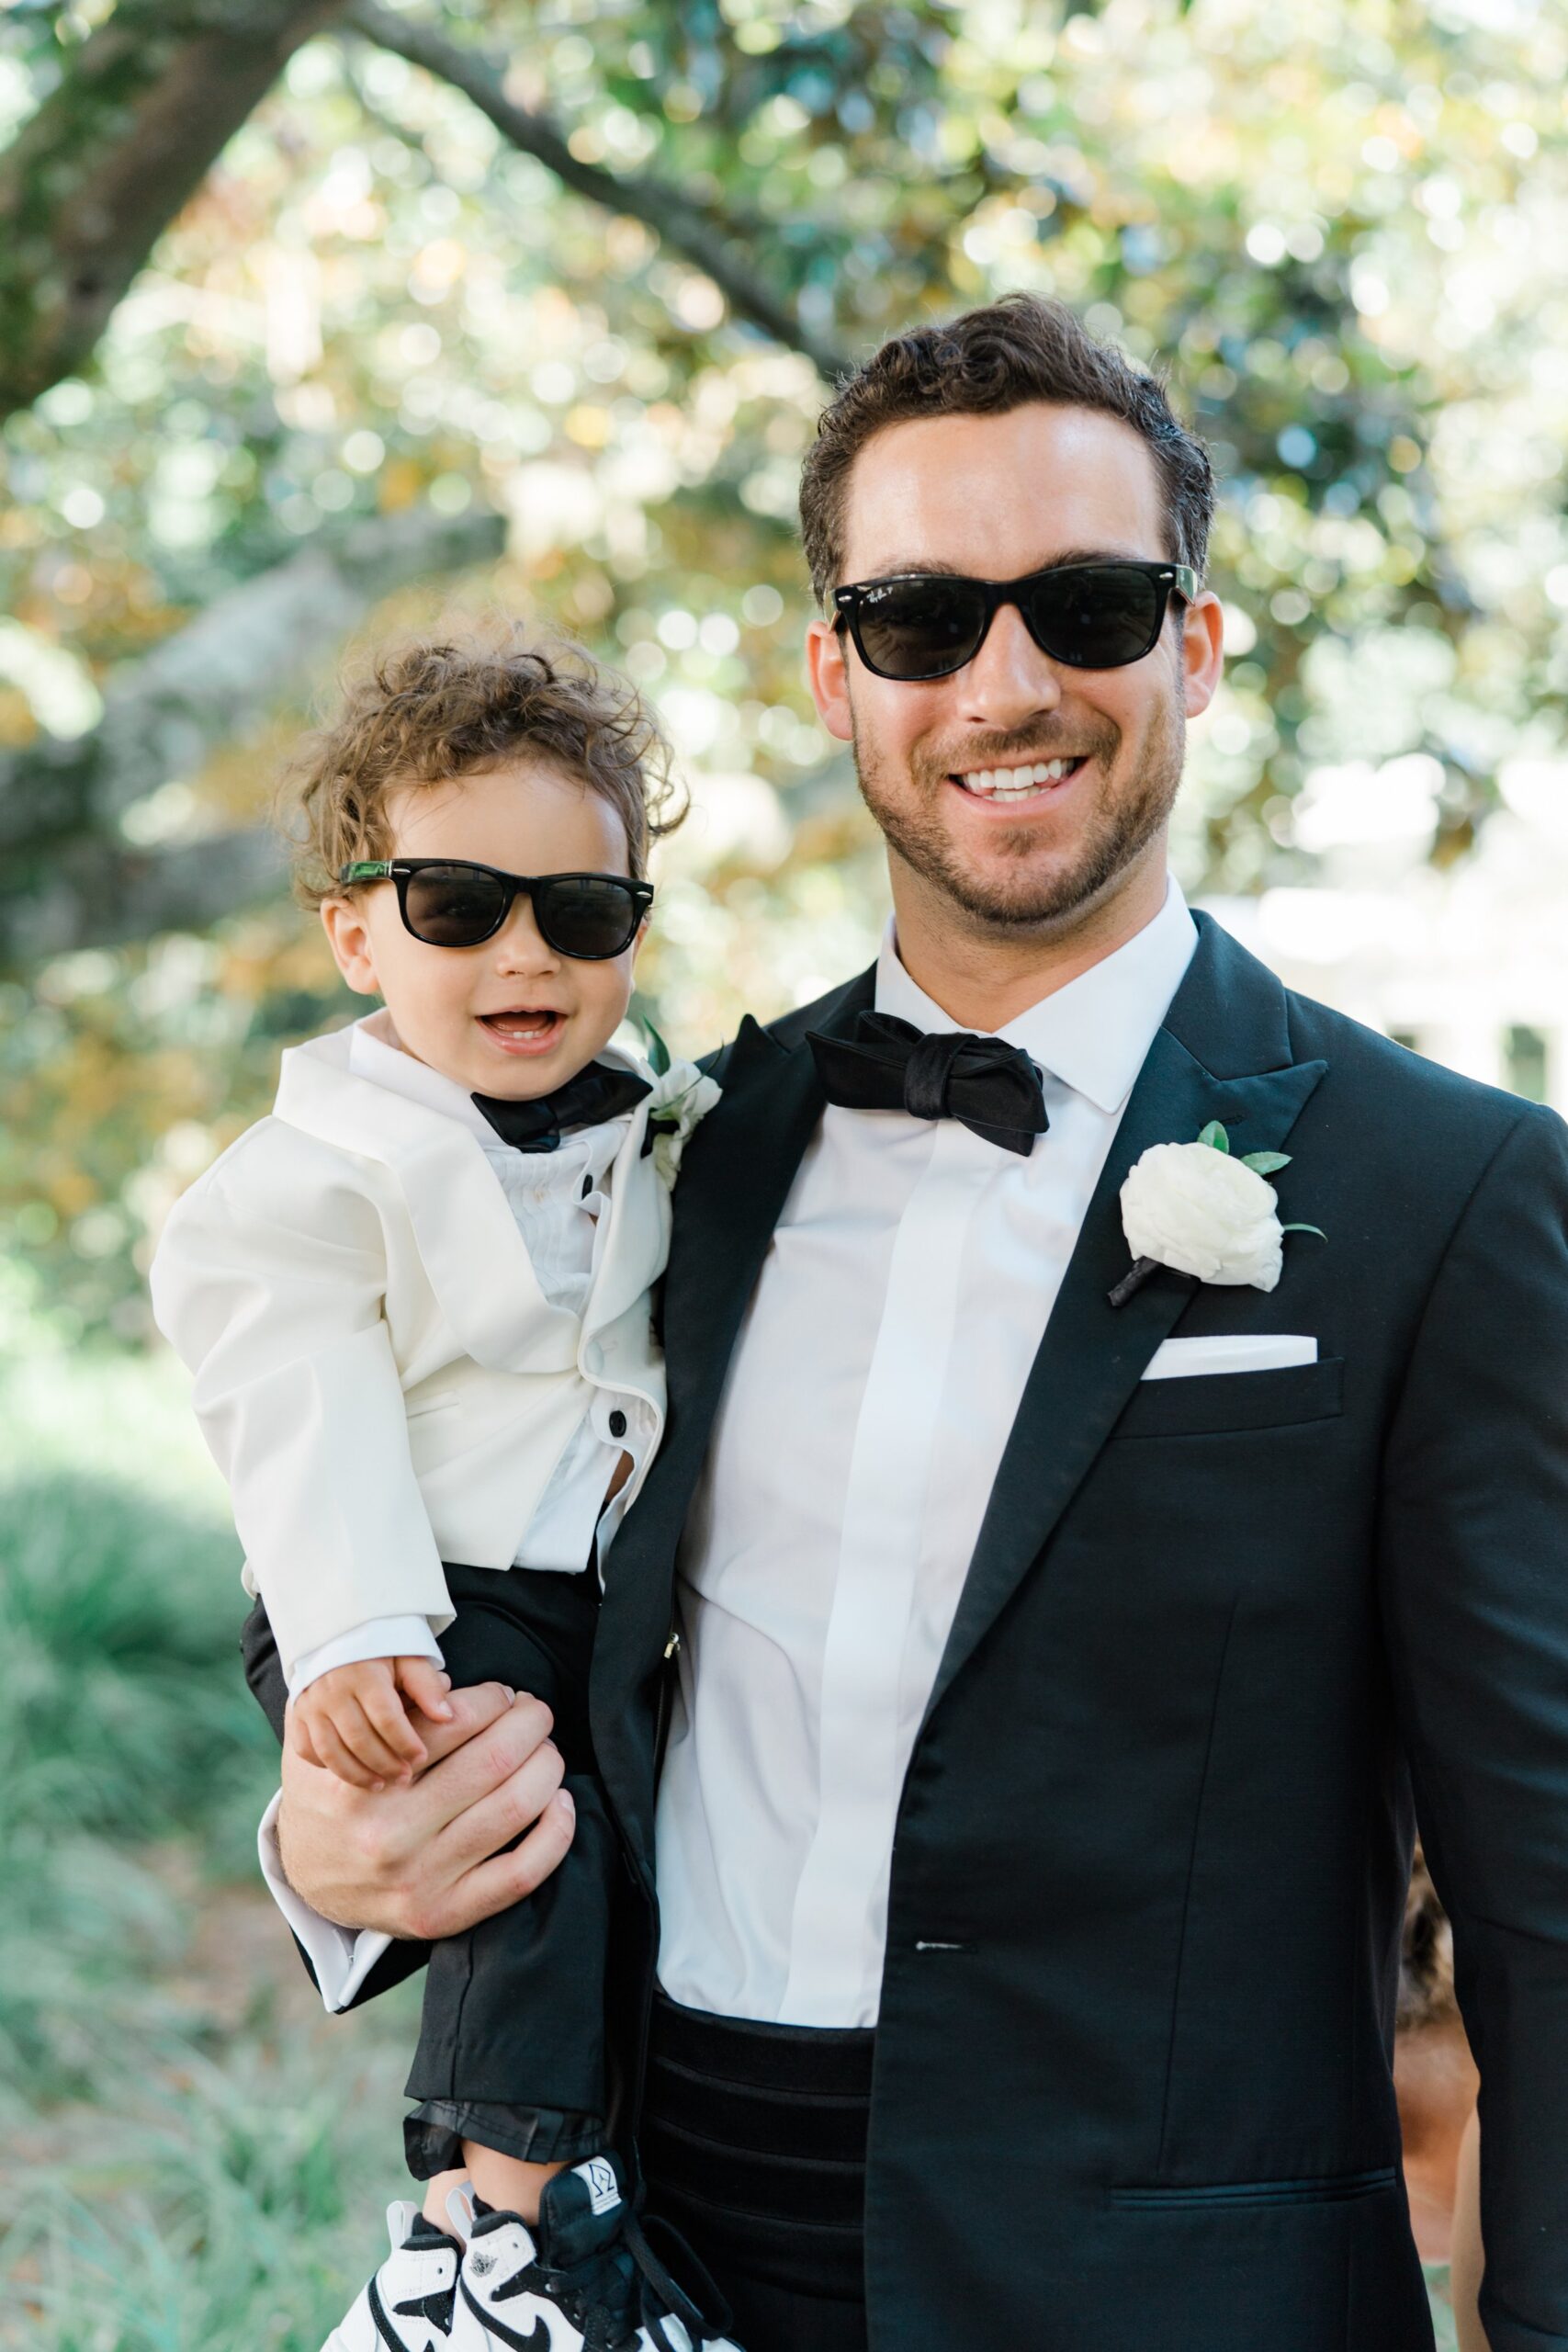 Father and son wearing tuxedos and sunglasses.